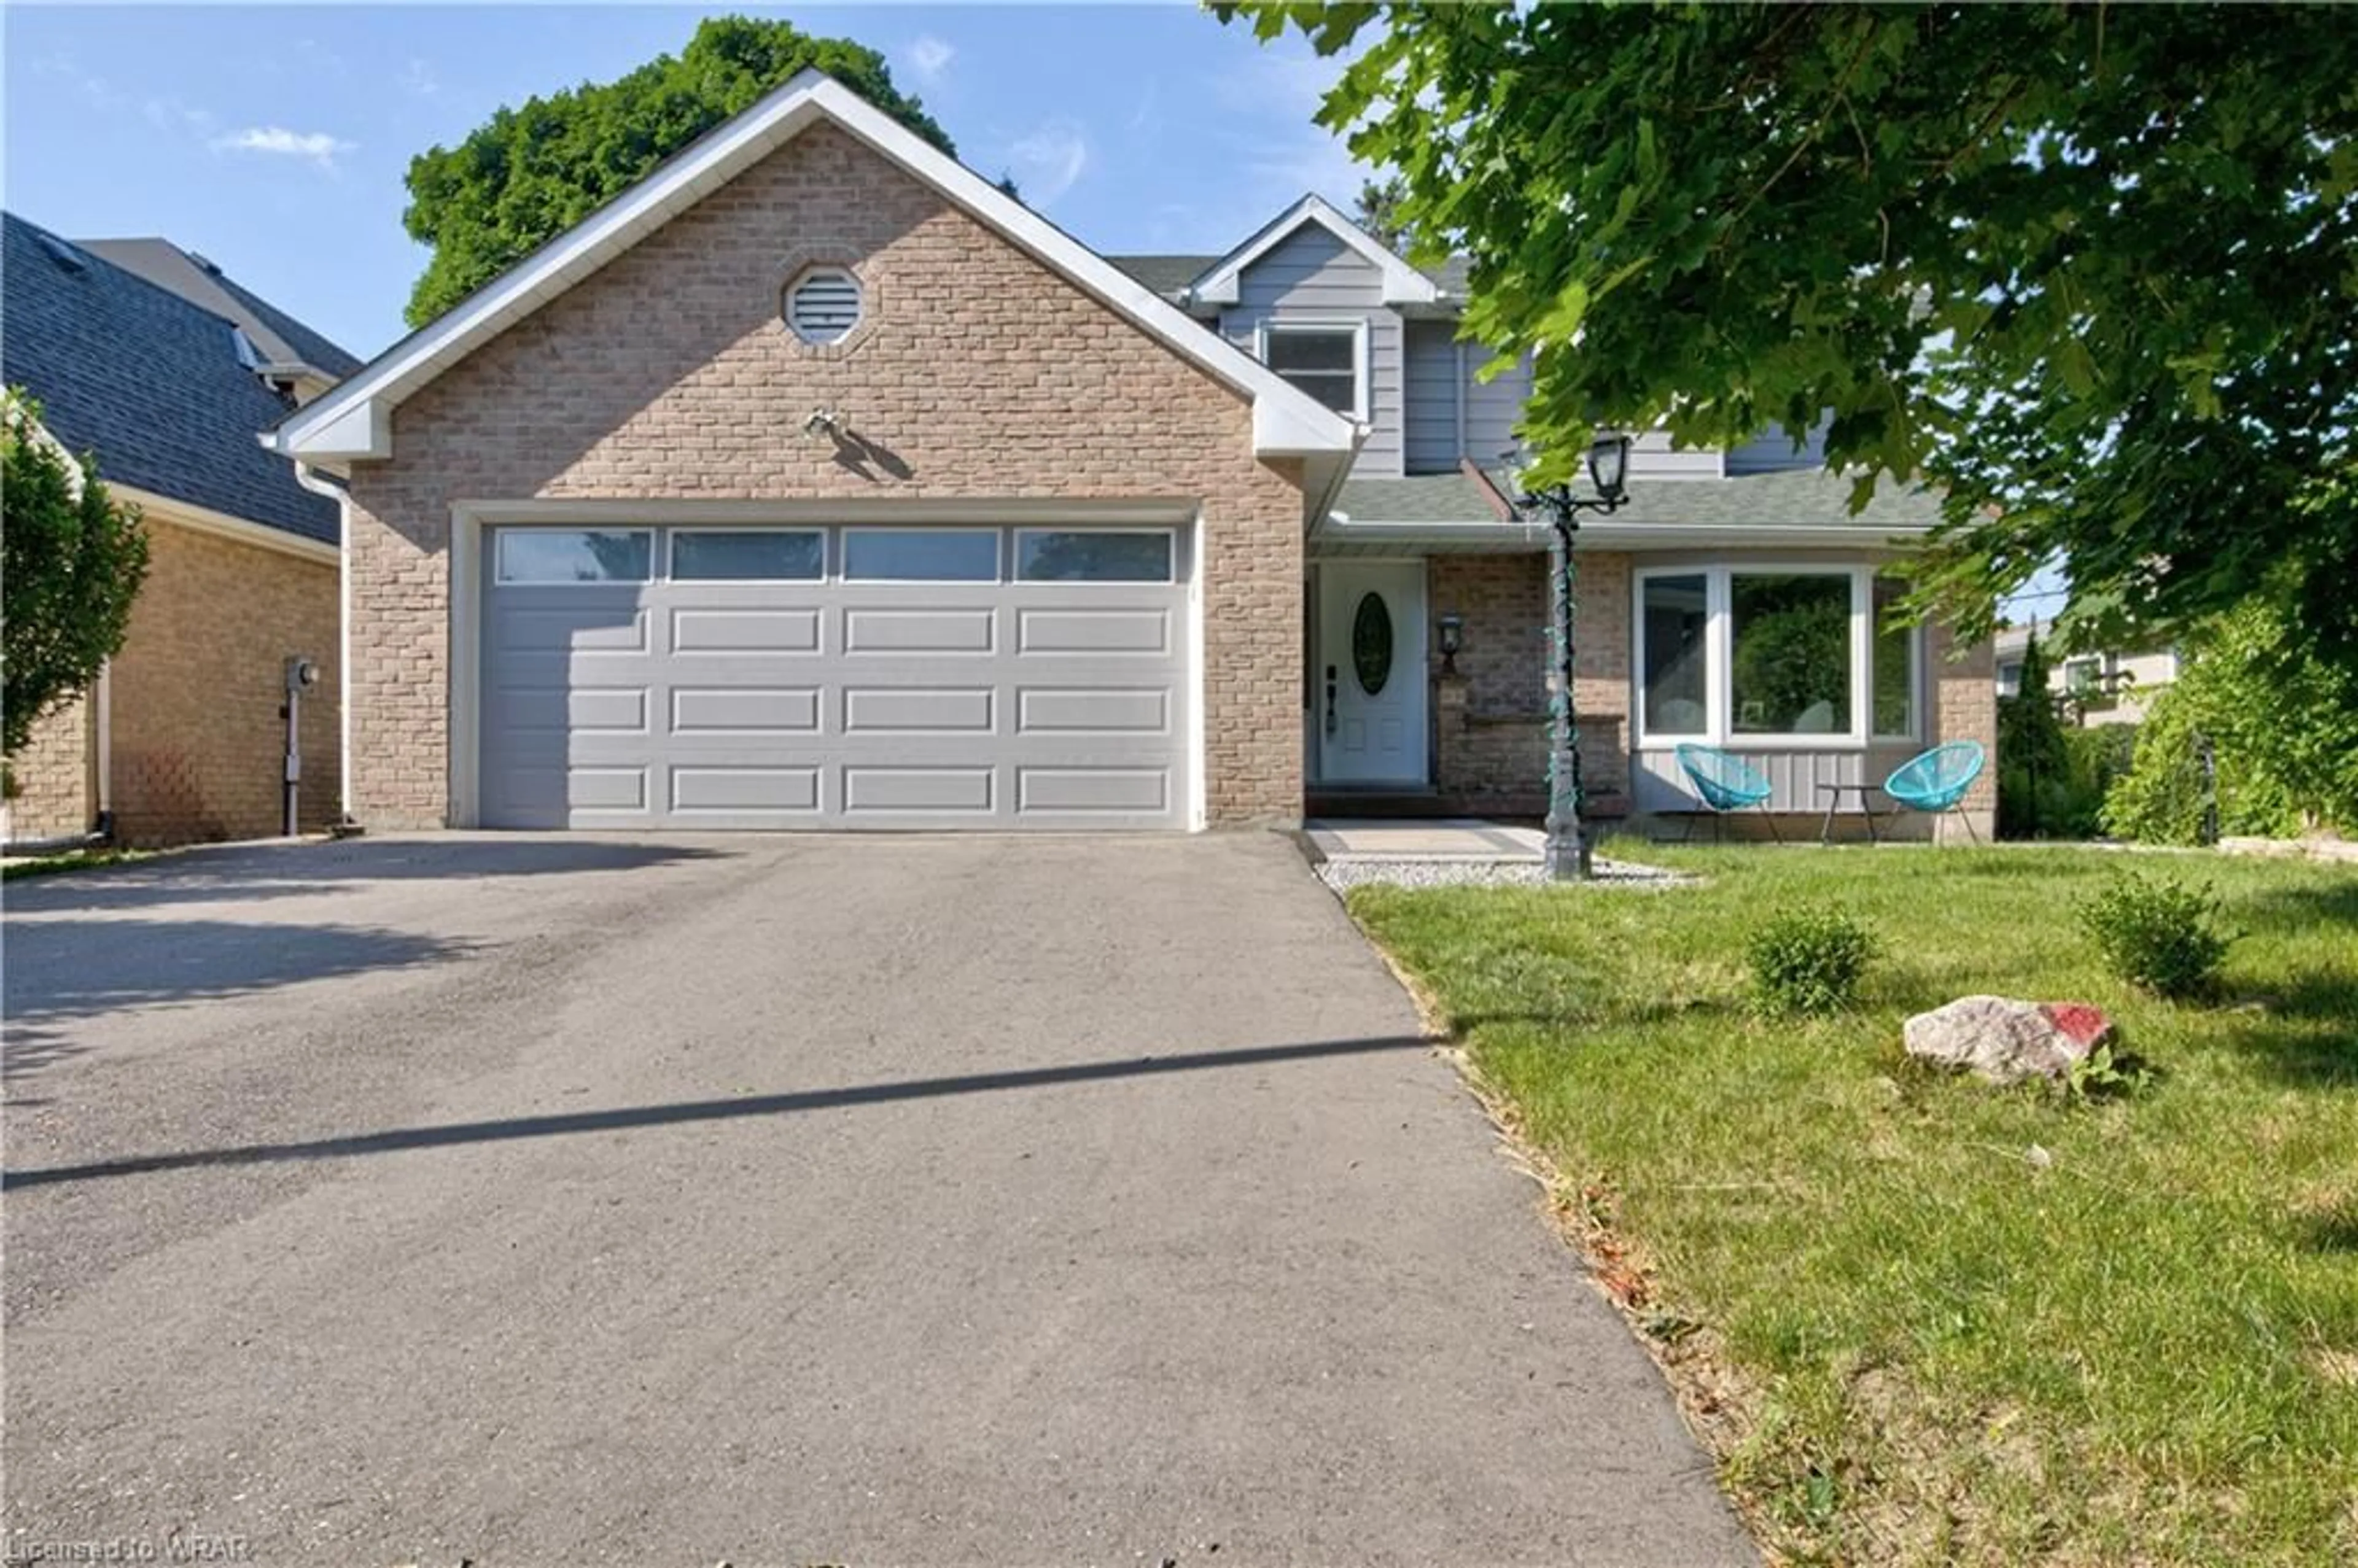 Frontside or backside of a home for 315 Faraday Crt, Waterloo Ontario N2L 6A4